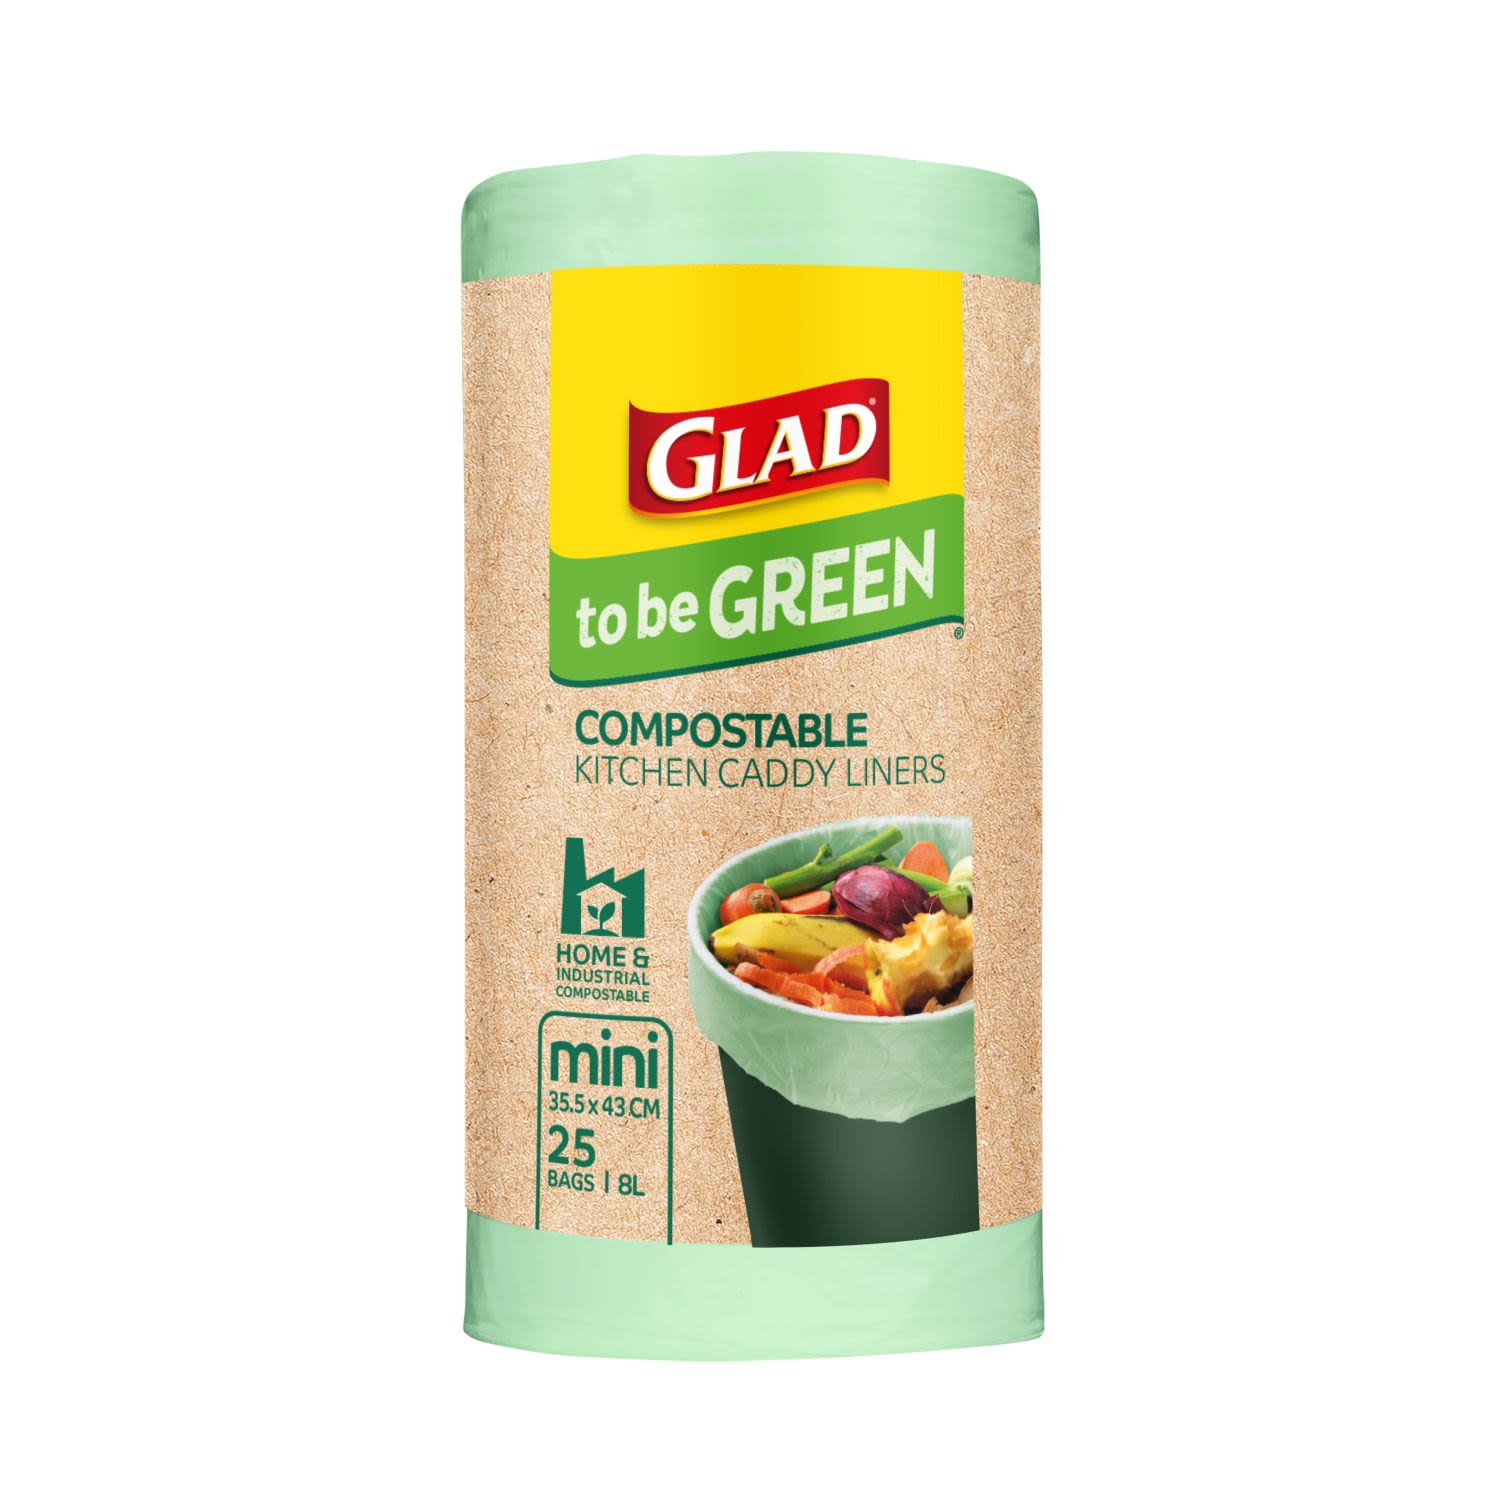 Glad To Be Green Compostable Mini, 25 Each